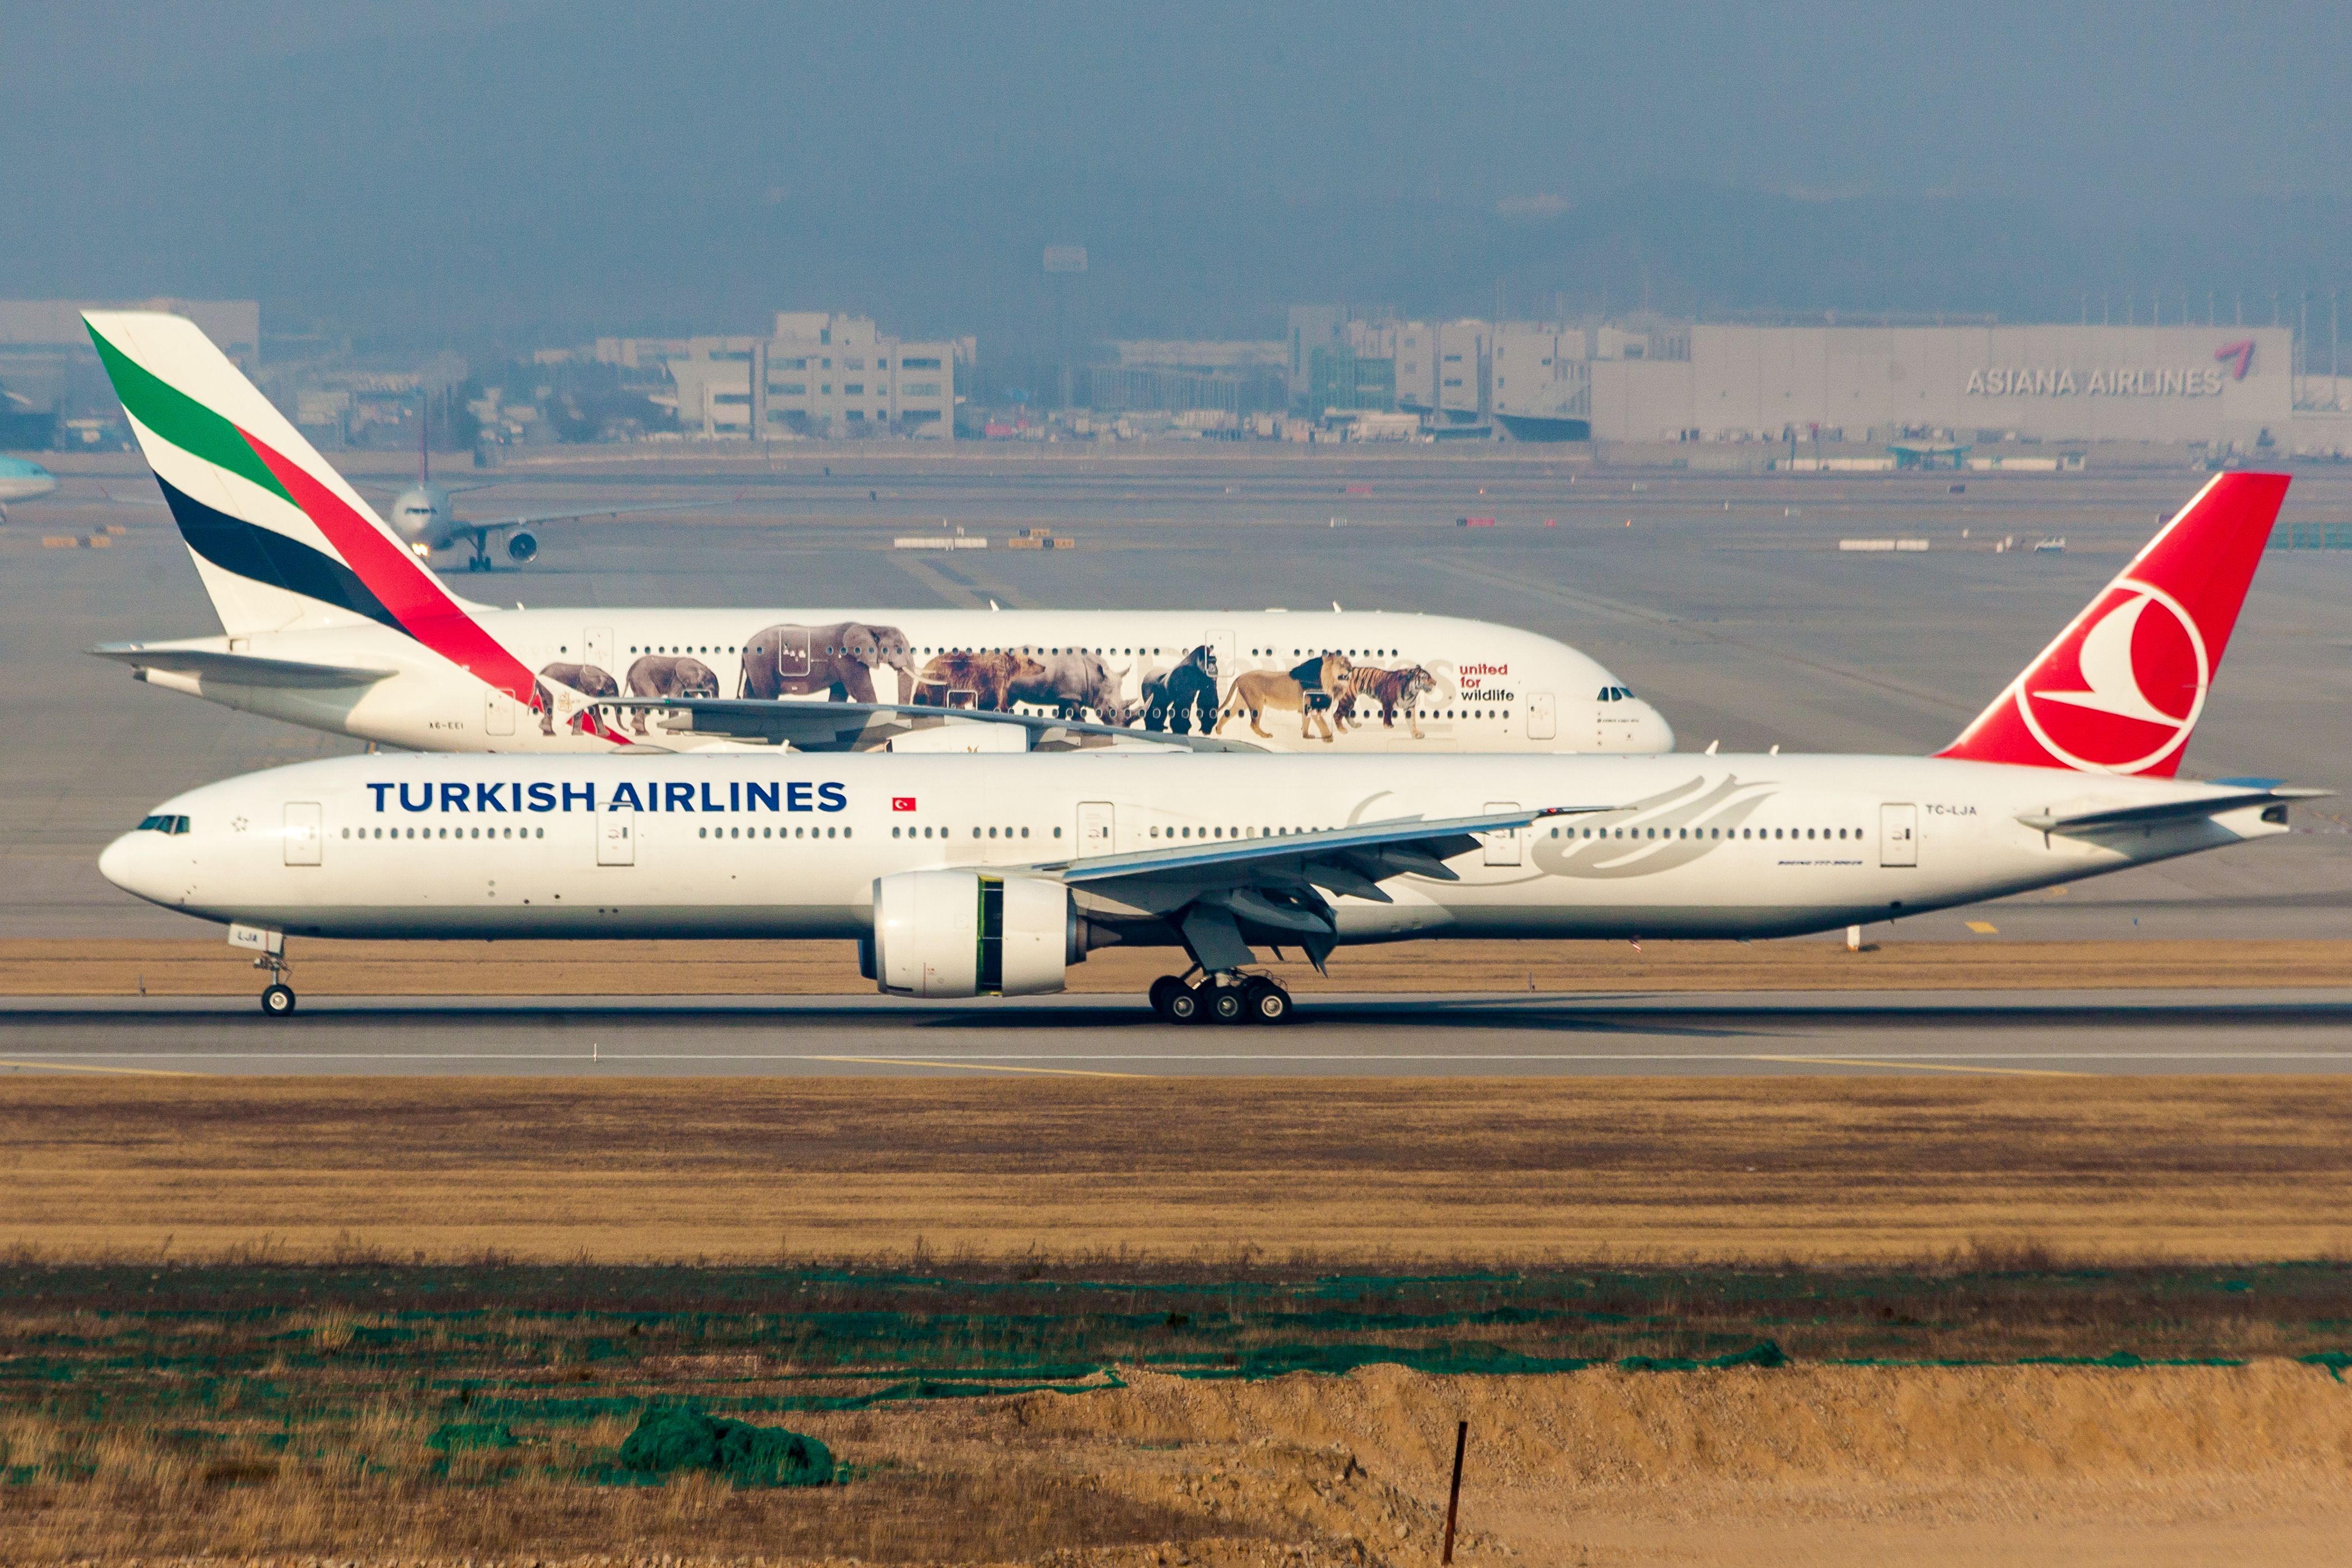 Turkish airlines Boeing 777-300ER landing while an Emirates Airbus A380 from Dubai was taxiing at Incheon international airport.